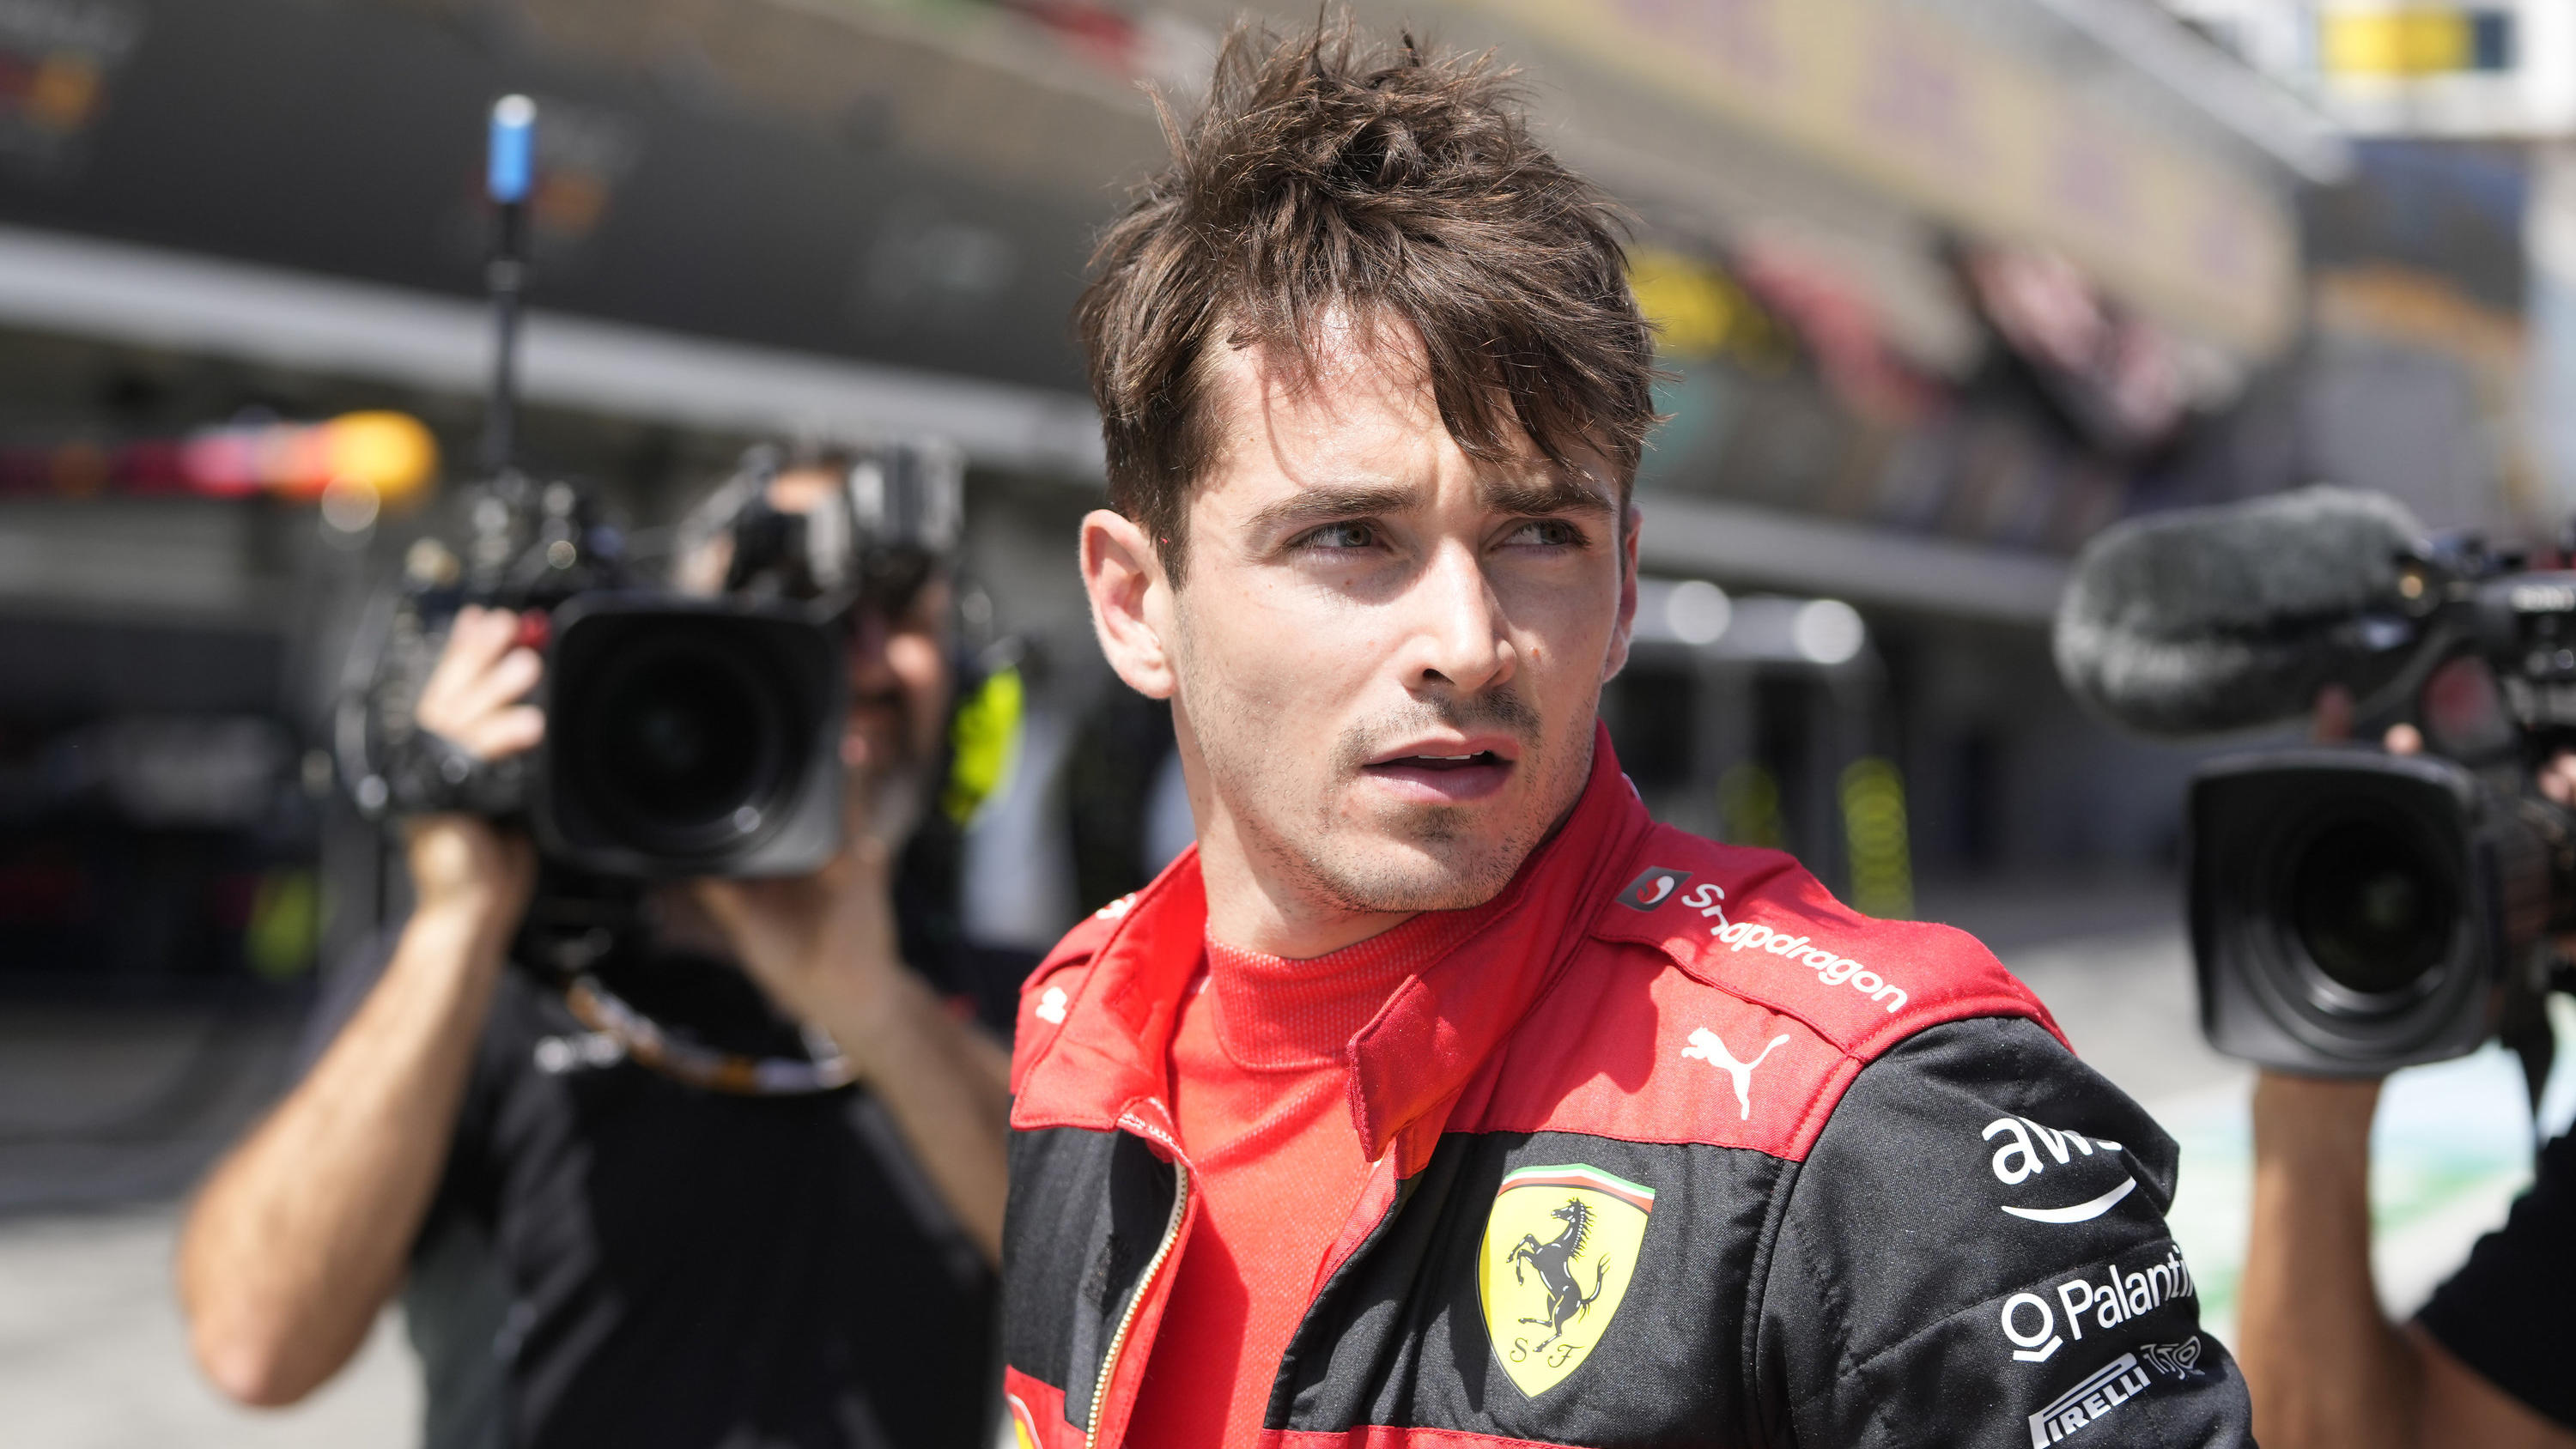 Ferrari driver Charles Leclerc of Monaco walks at the pit lane after his car's breakdown during the Spanish Formula One Grand Prix at the Barcelona Catalunya racetrack in Montmelo, Spain, Sunday, May 22, 2022. (AP Photo/Pool/Manu Fernandez)